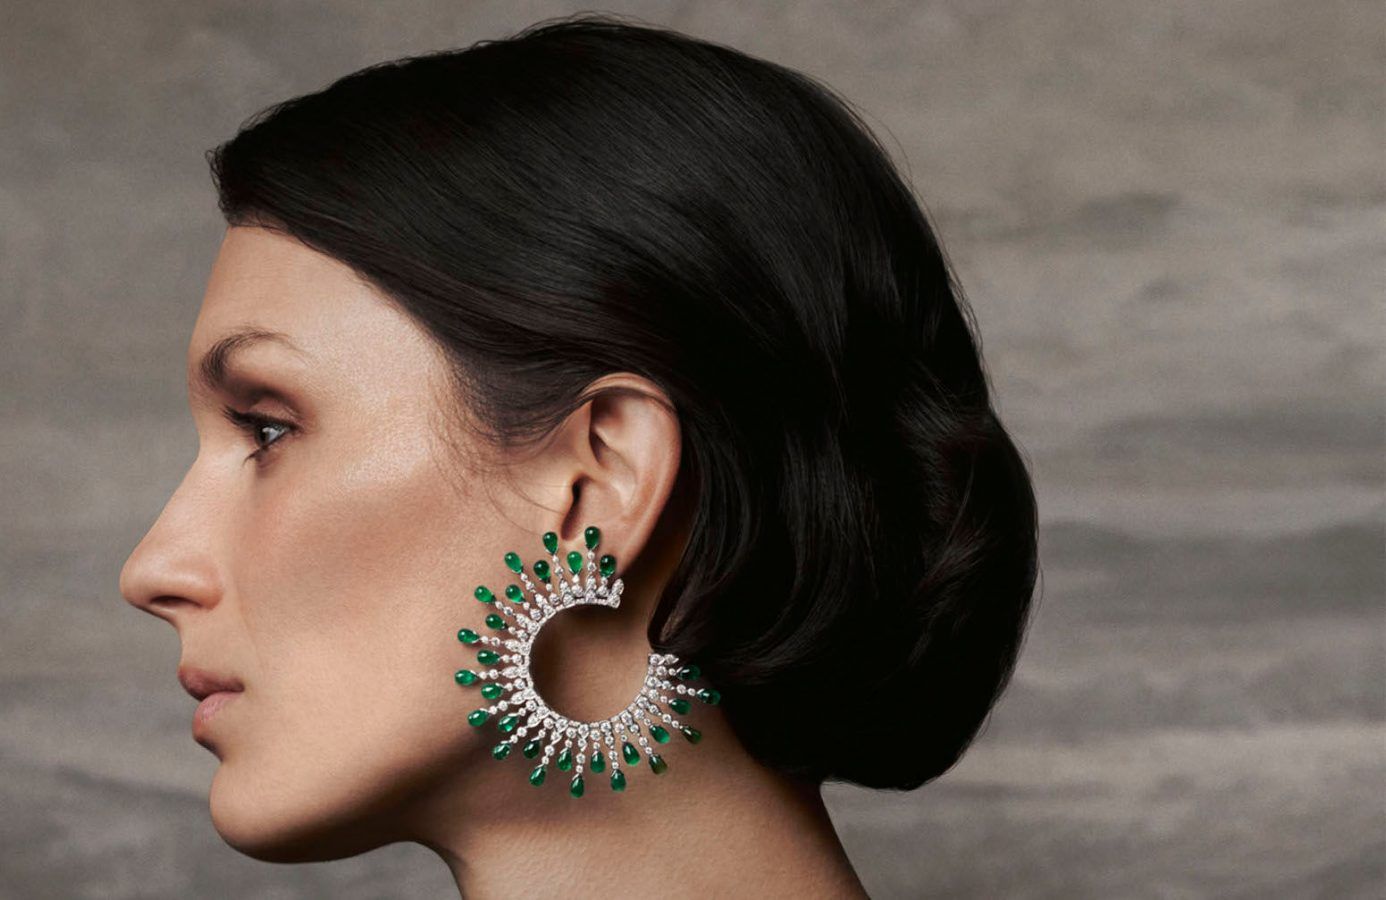 Claire Choisne, Boucheron’s Artistic Director, on Reinventing The Iconic Maharajahs Collection